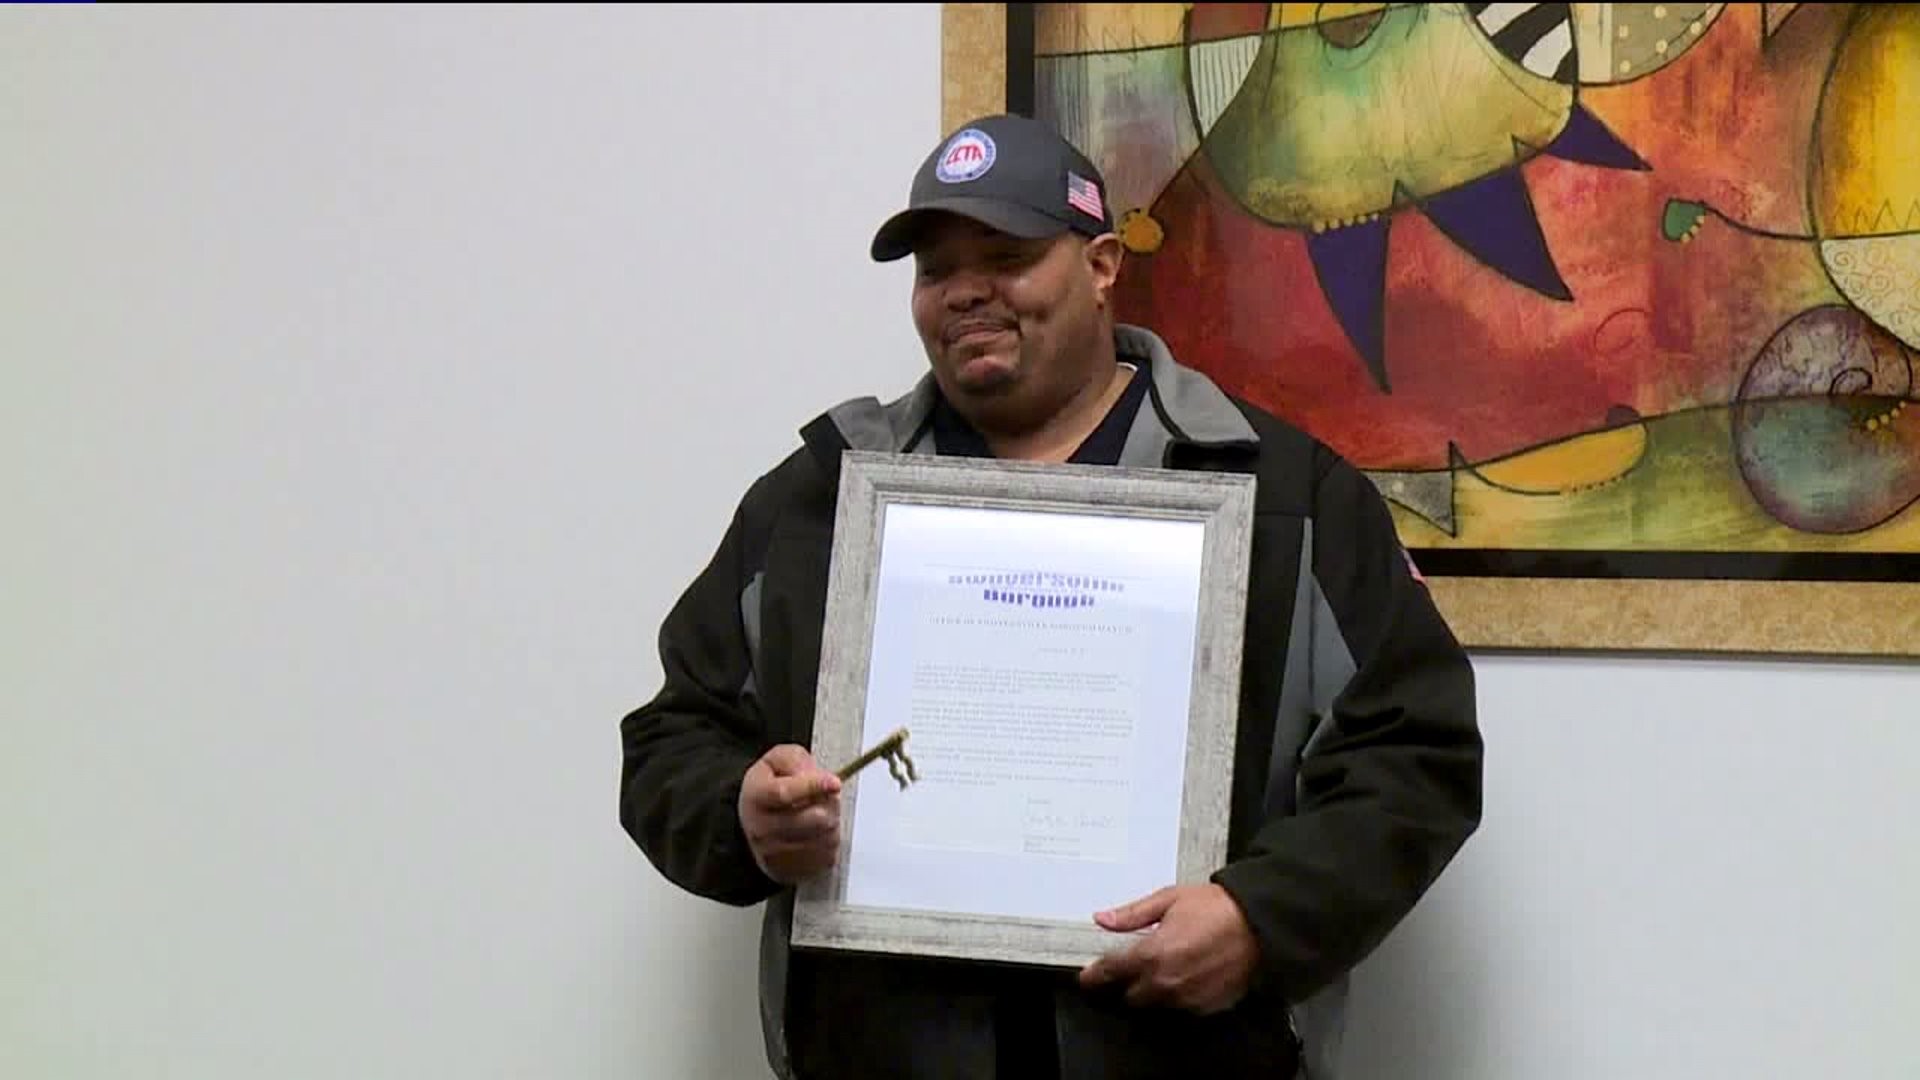 LCTA Bus Driver Honored for Pulling Man to Safety